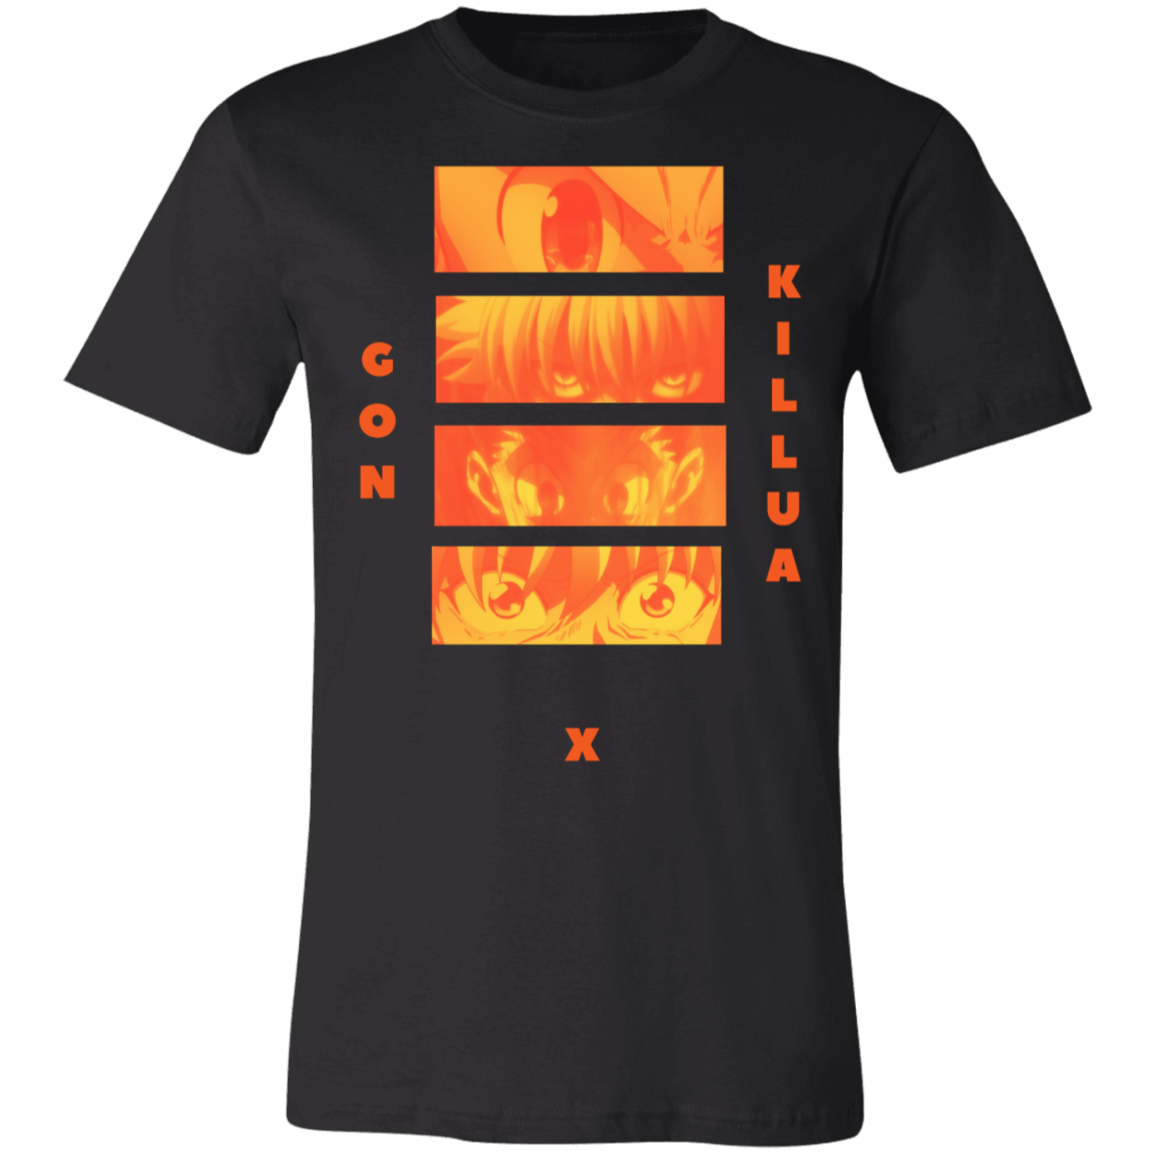 hunter x hunter tee in black, the left side reads "gon", the bottom reads "x", and the right side reads "killua" the lettering and design is orange